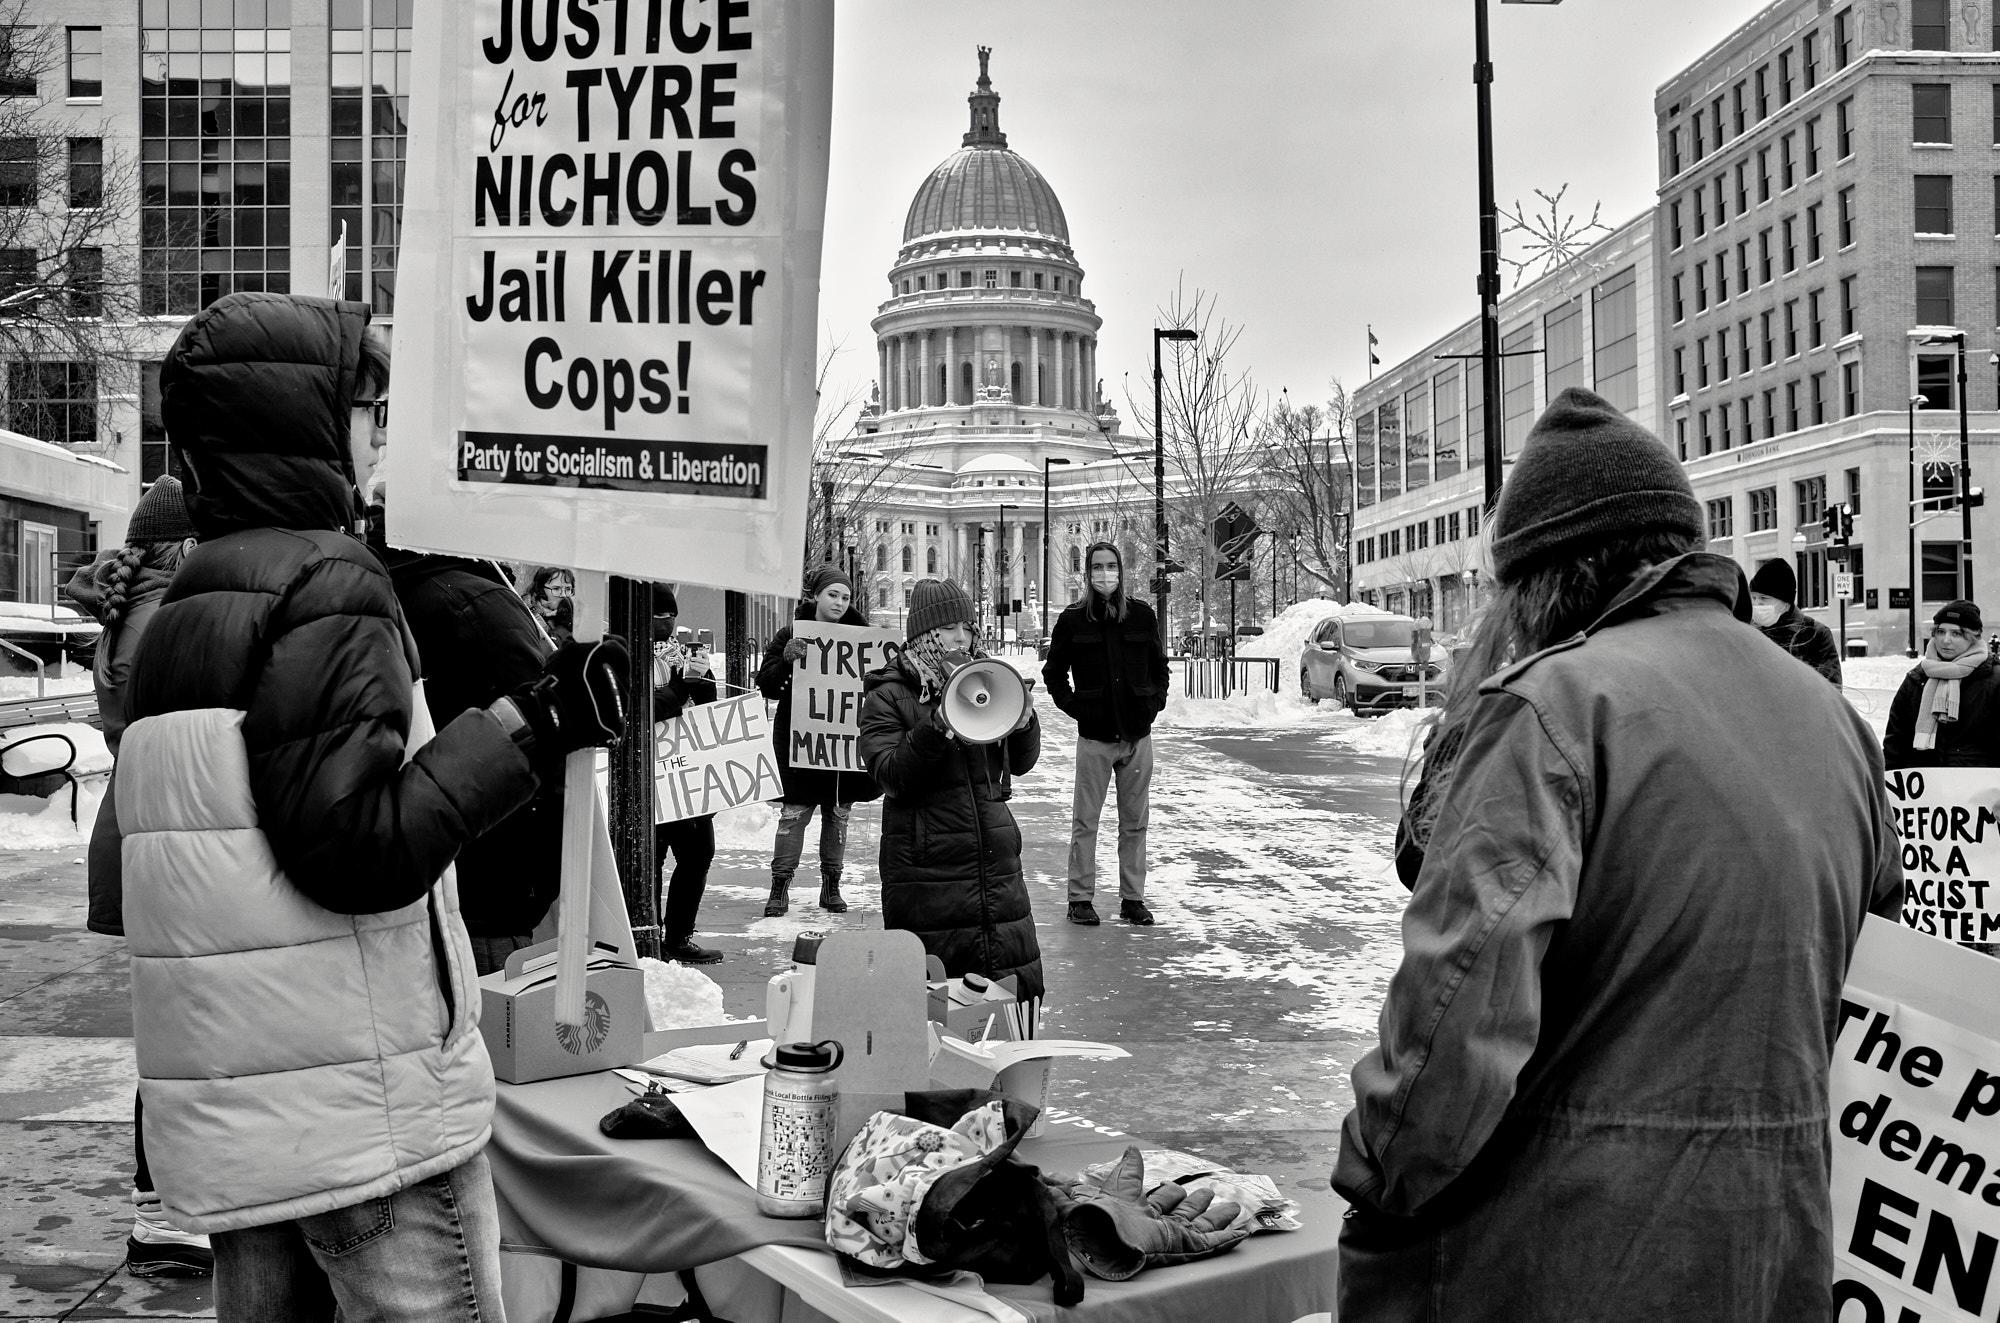 Justice for Tyre Nichols (b&w)